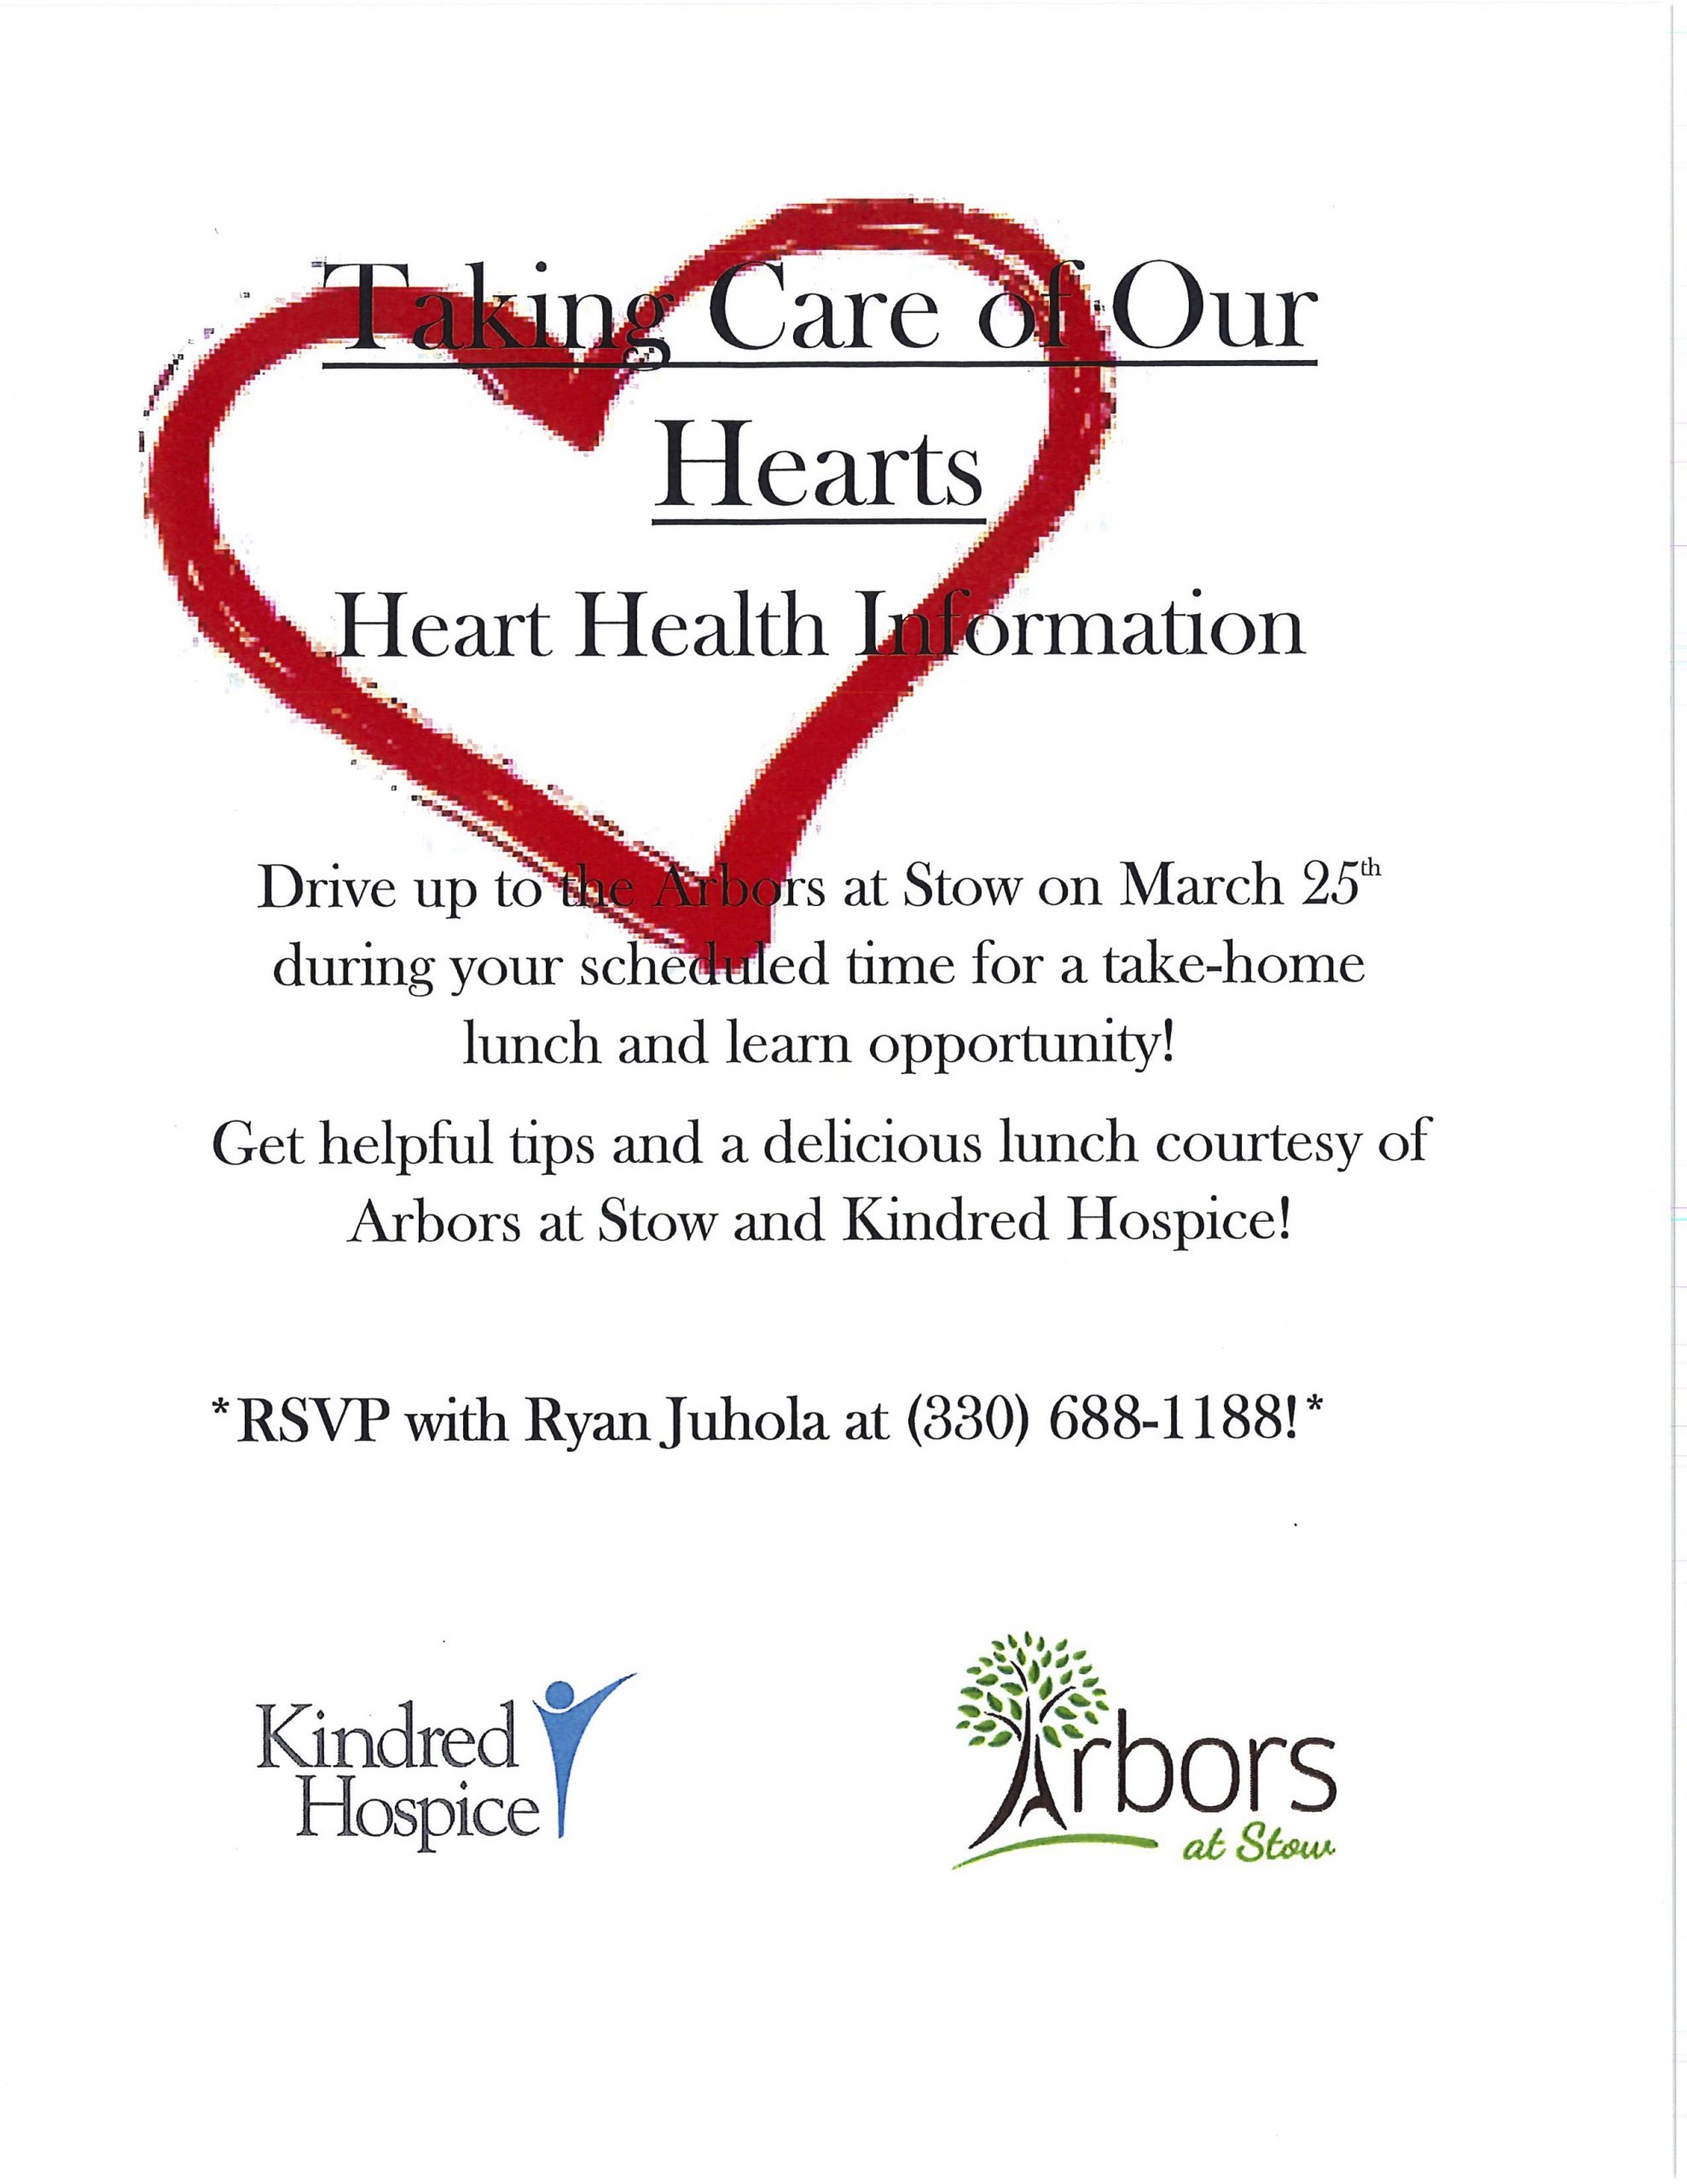 Kindred Hospice and Arbors at Stow Lunch and Learn